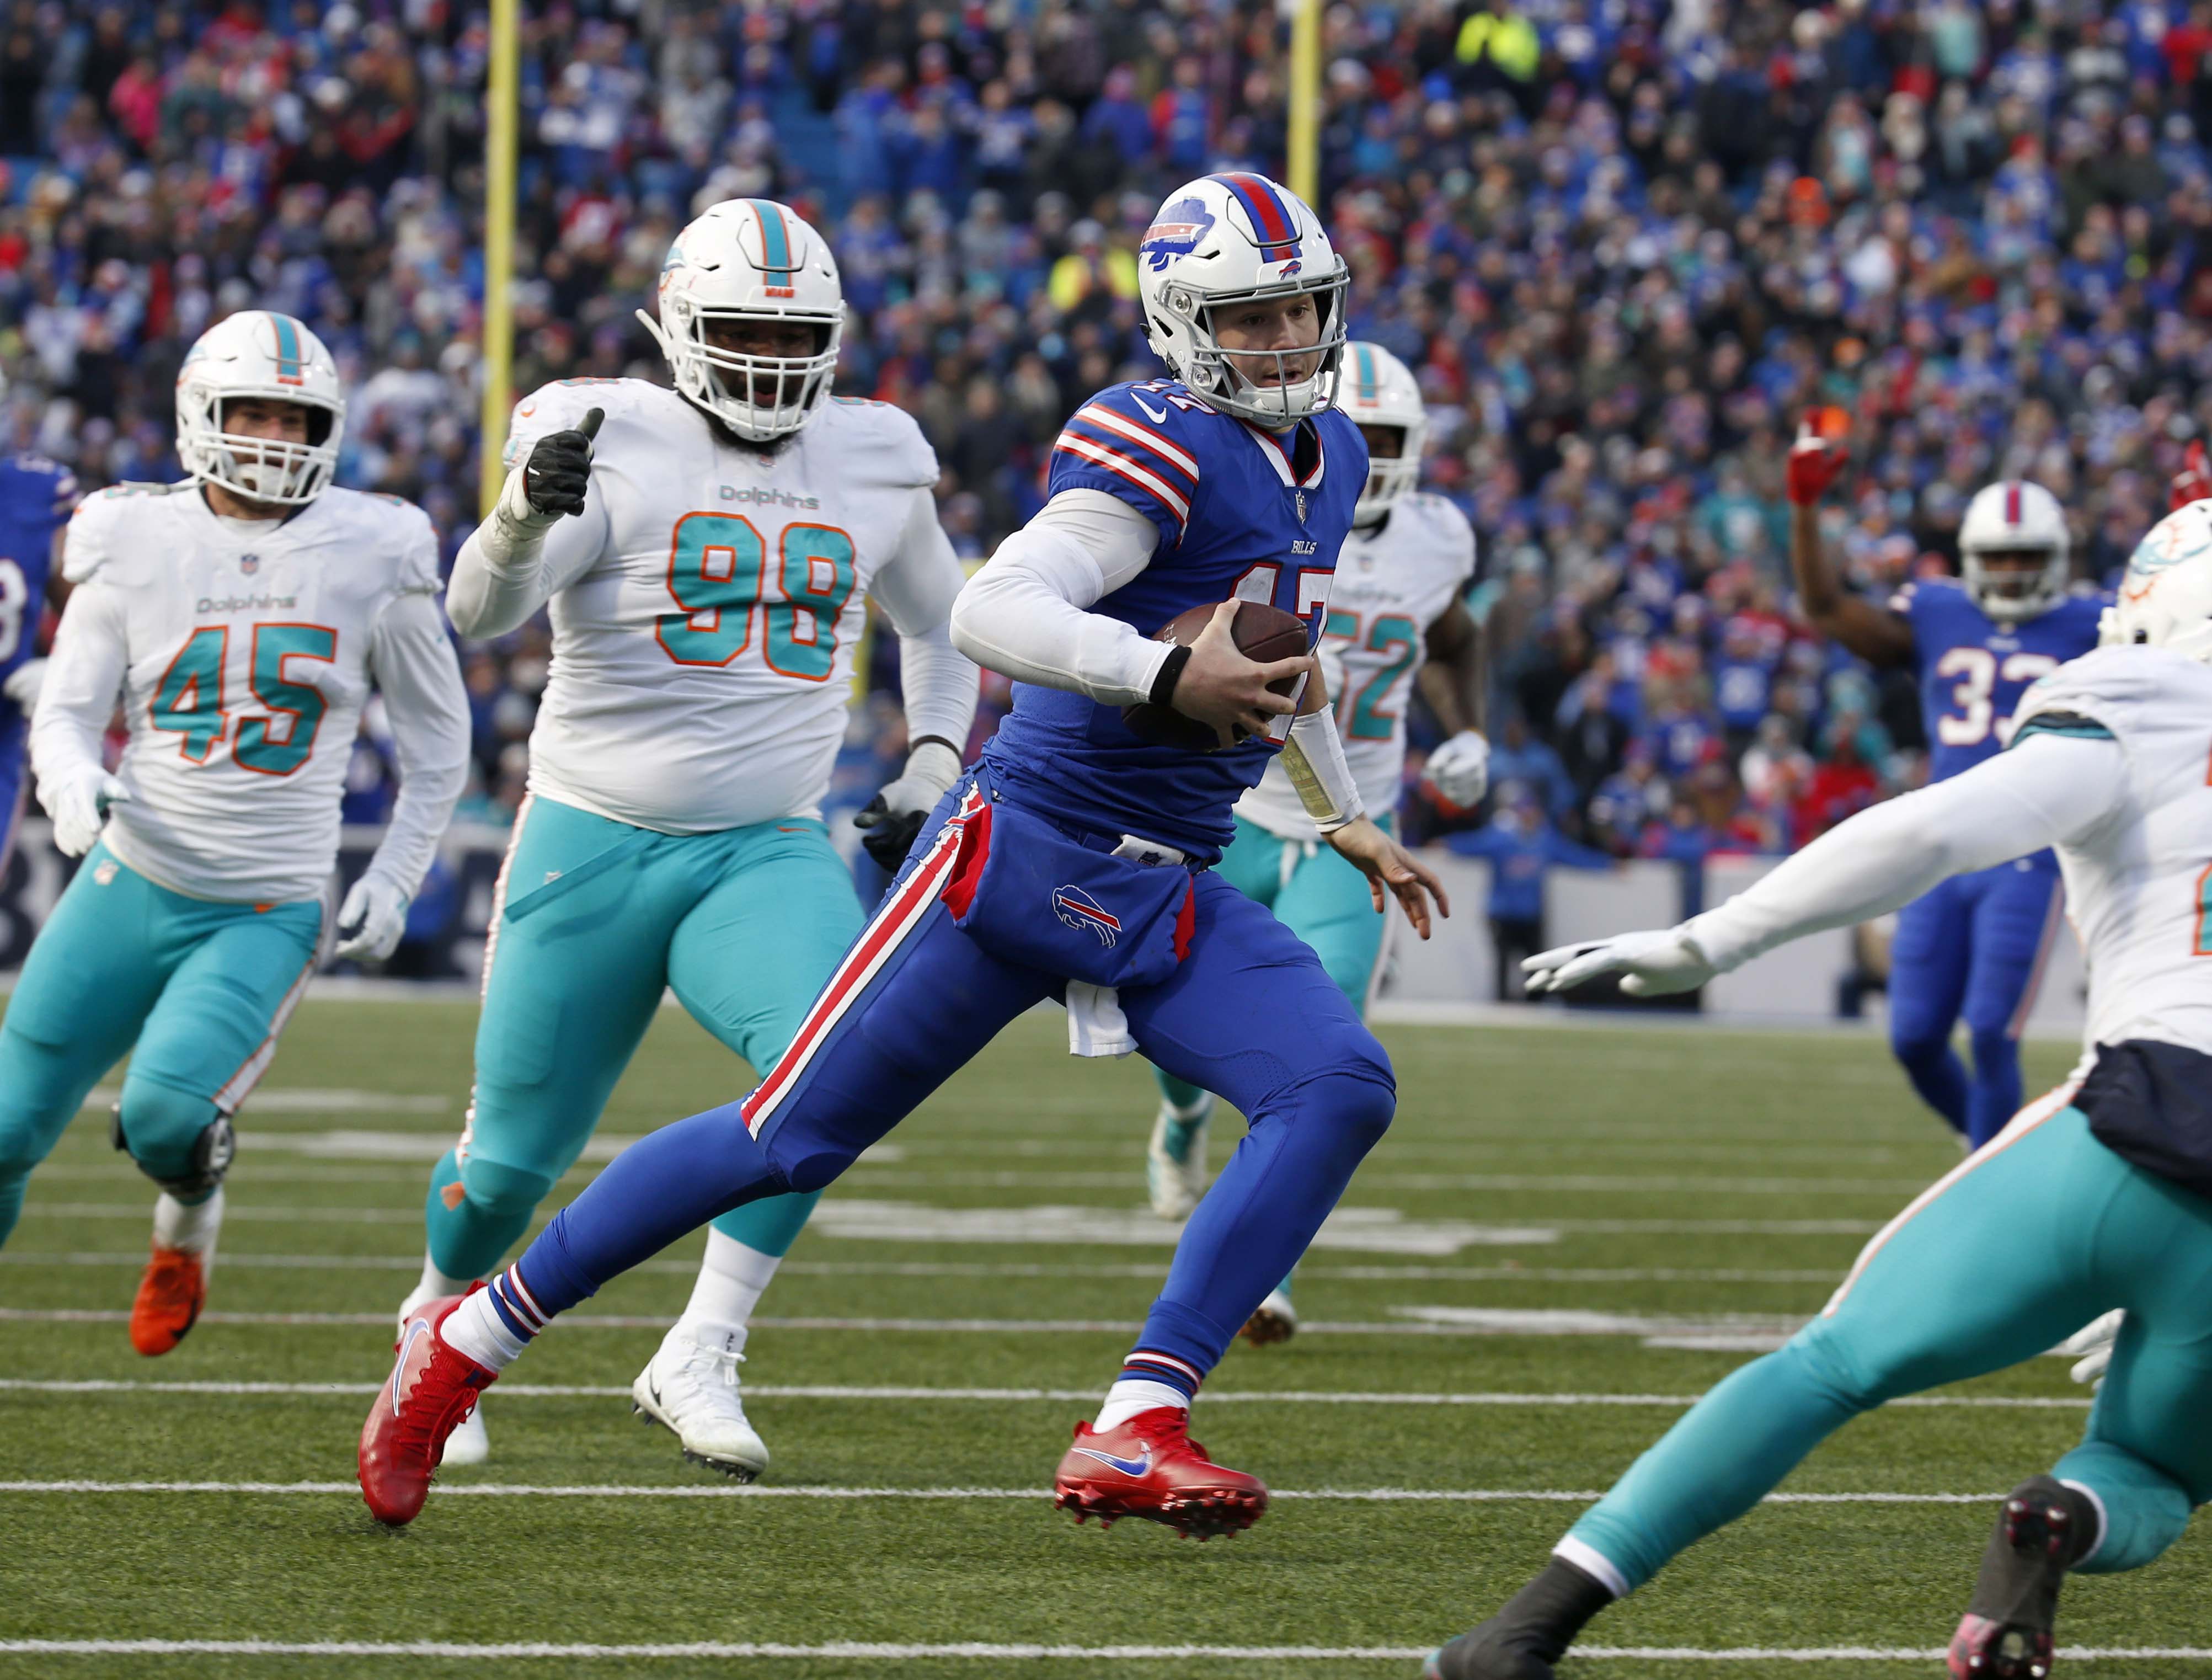 Top 5 storylines to follow for Bills vs. Dolphins